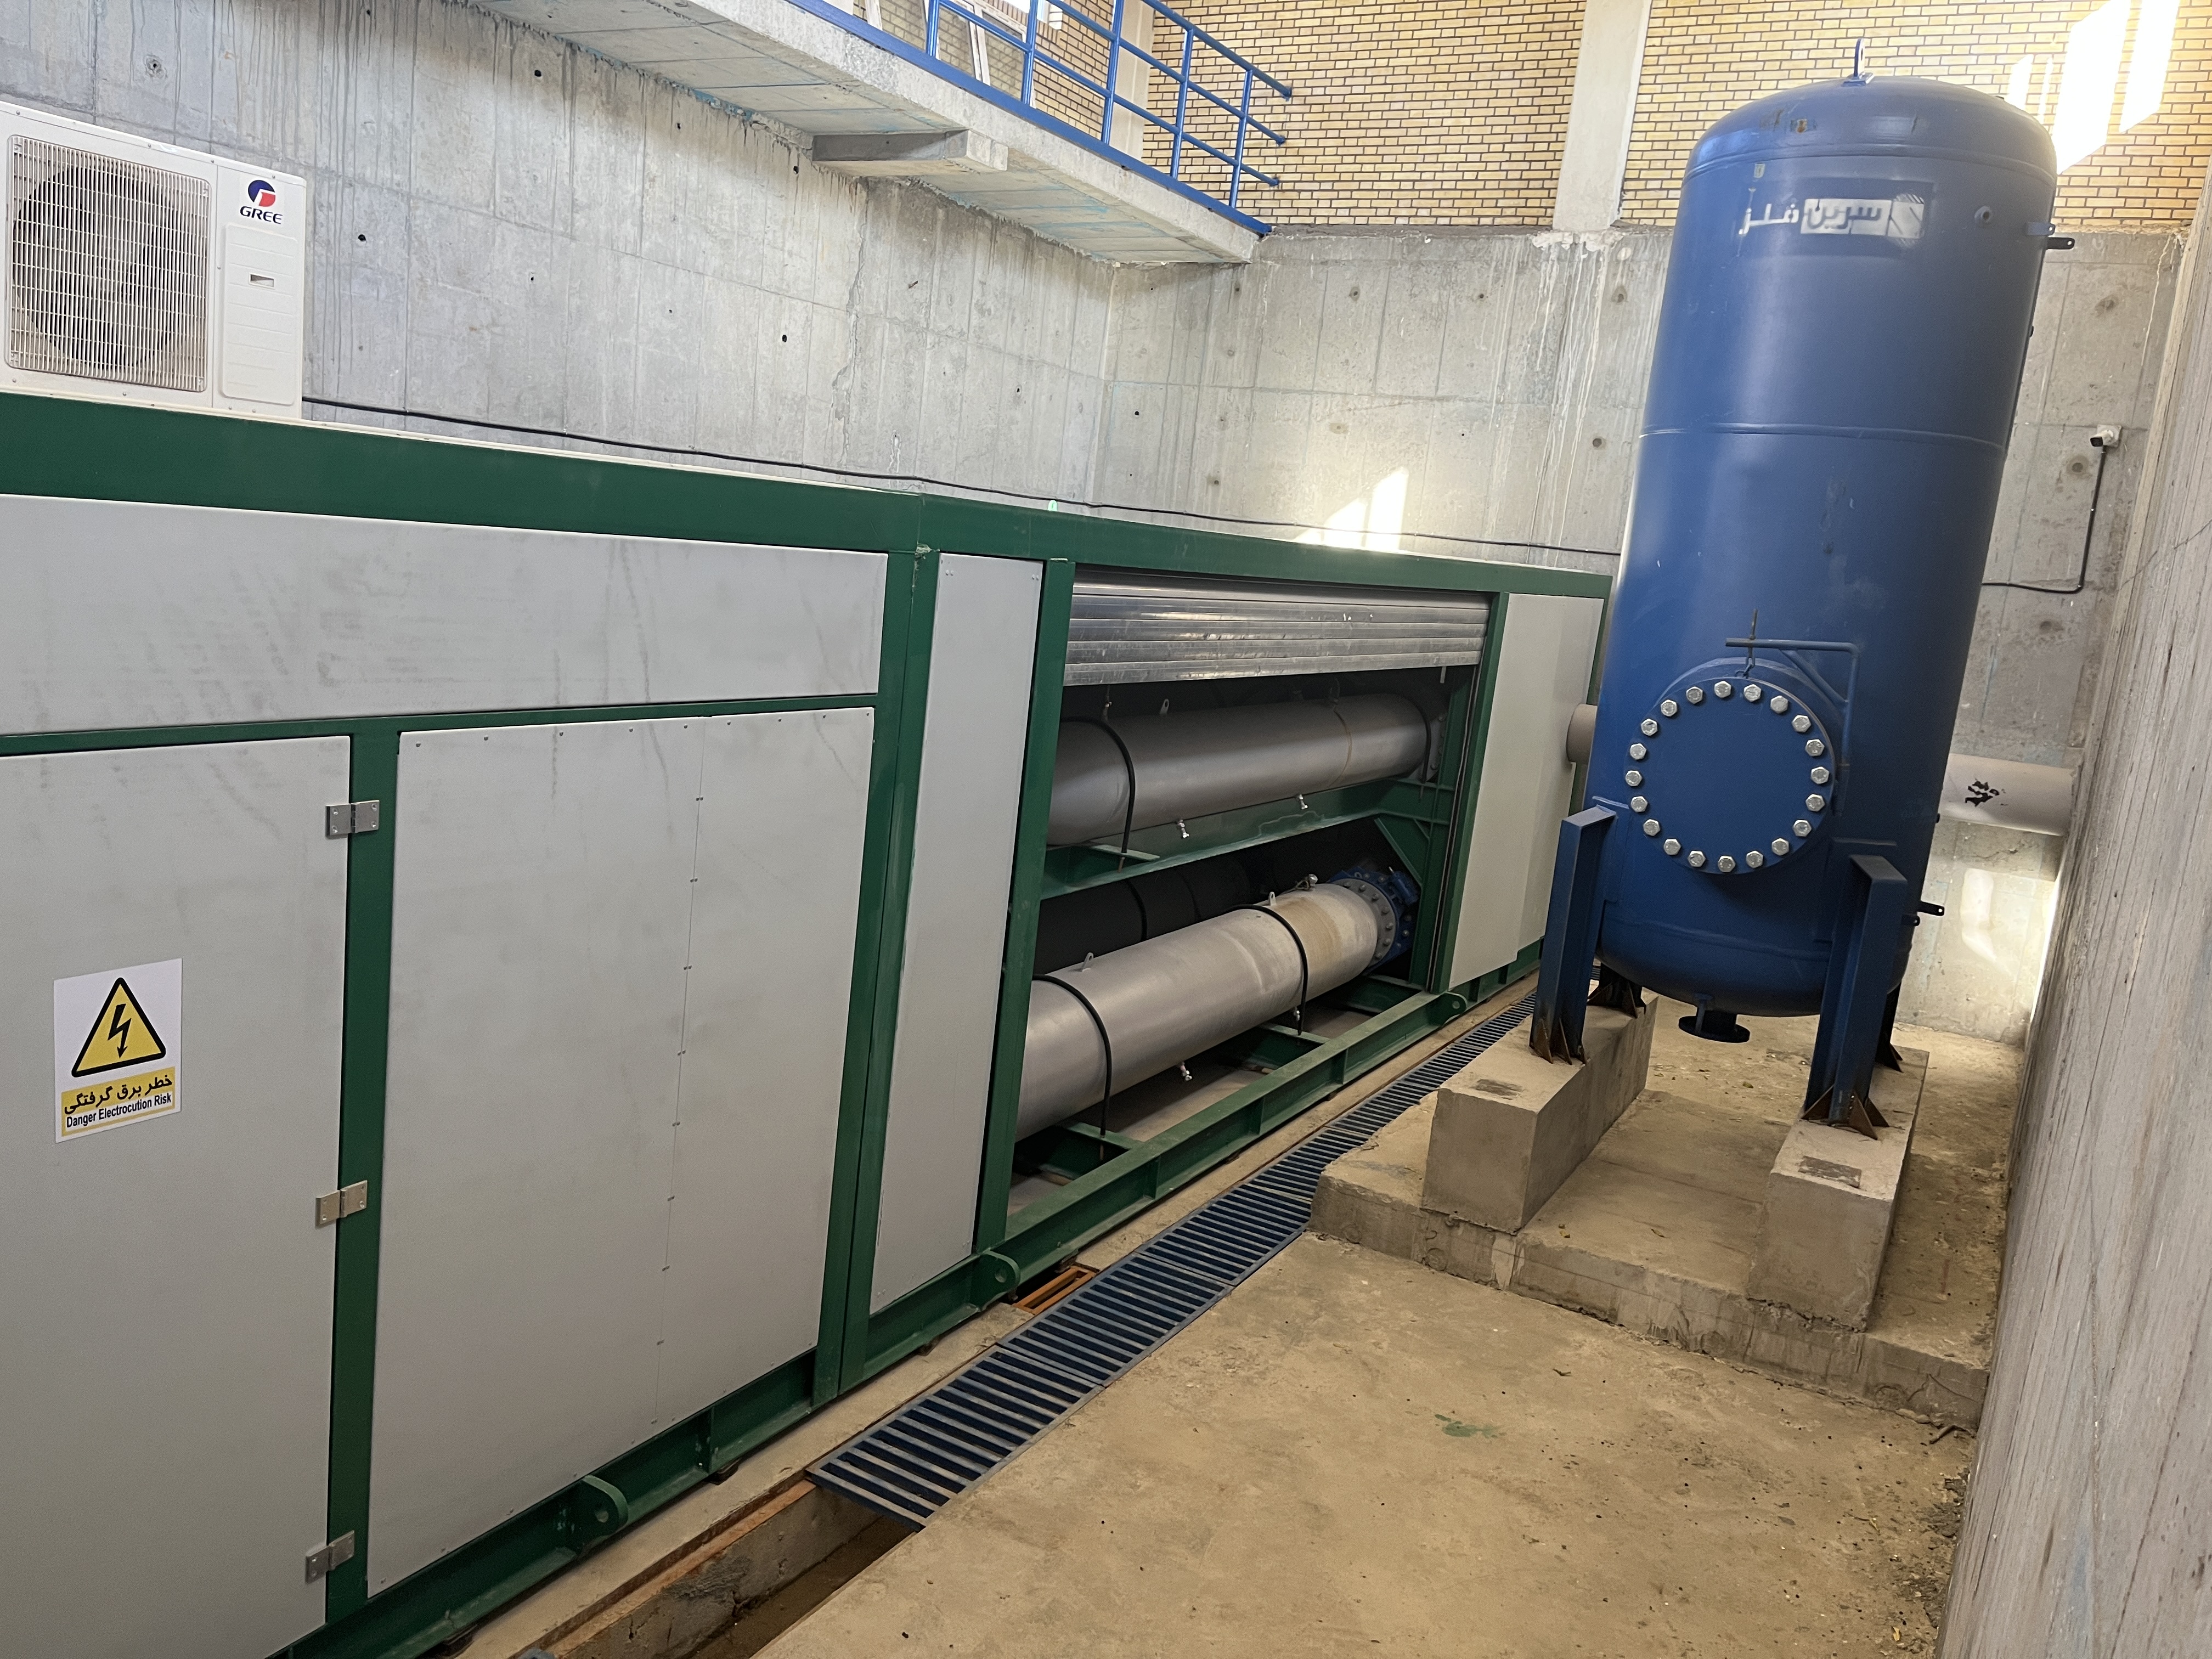 The pumping station package of Saman